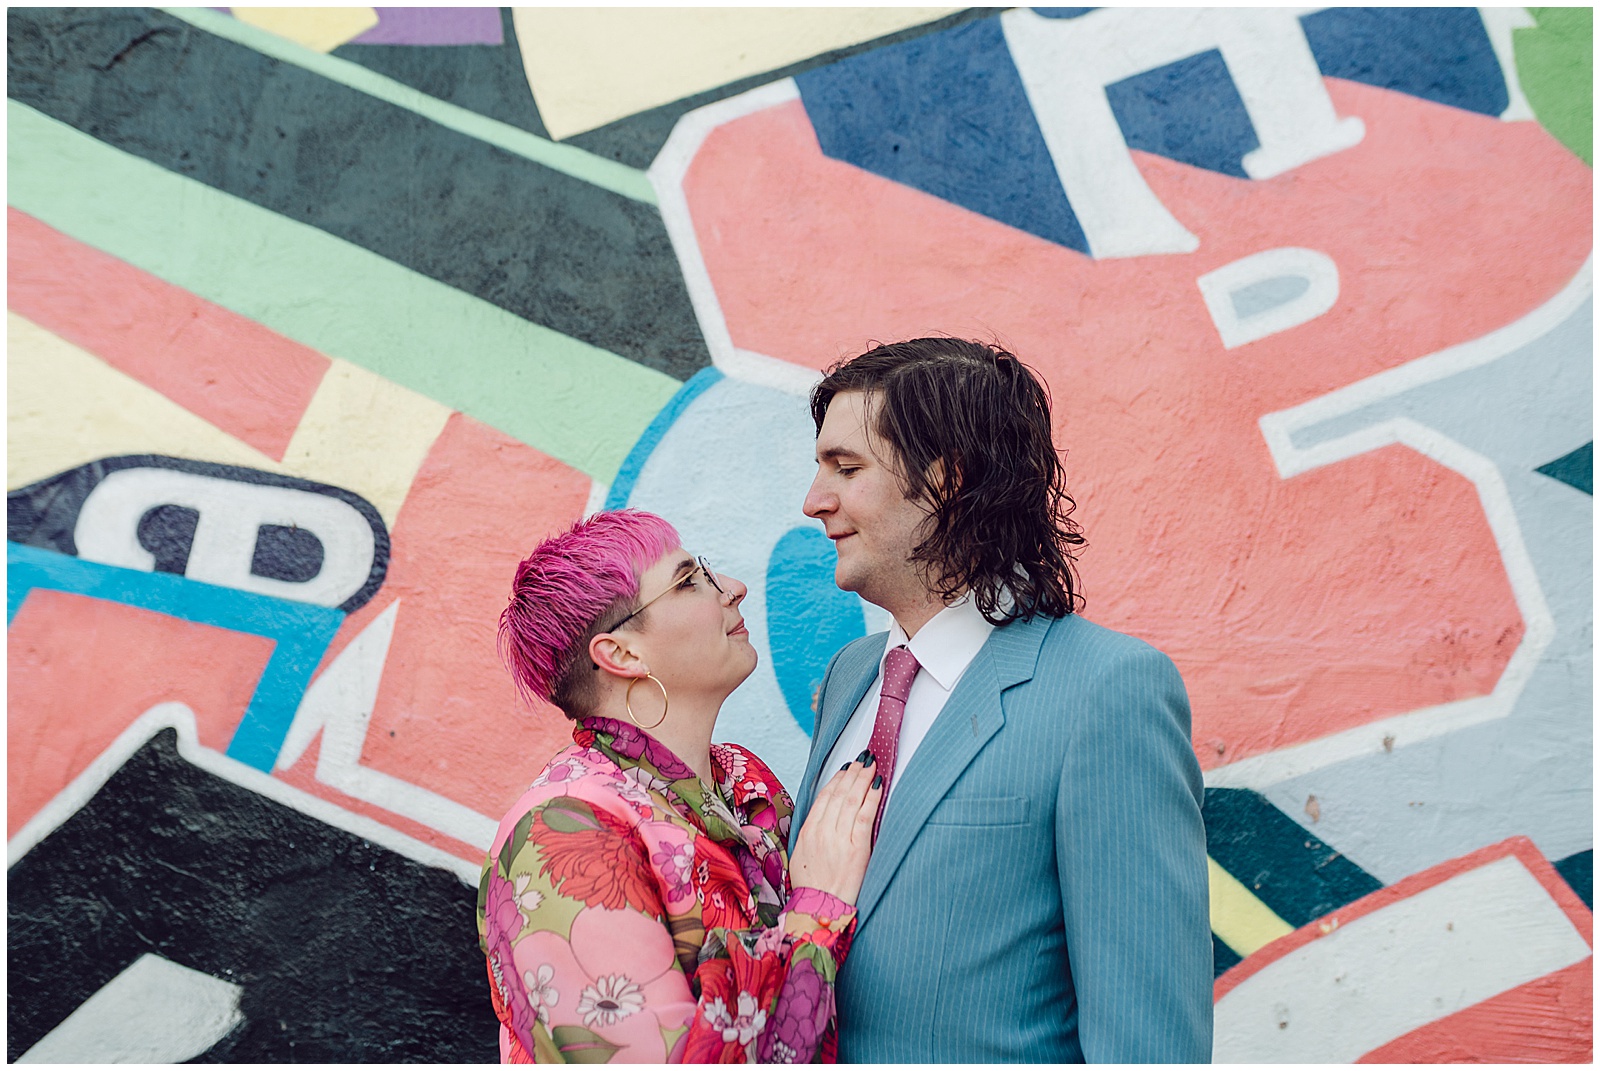 A couple in colorful wedding attire stands in front of an abstract mural.